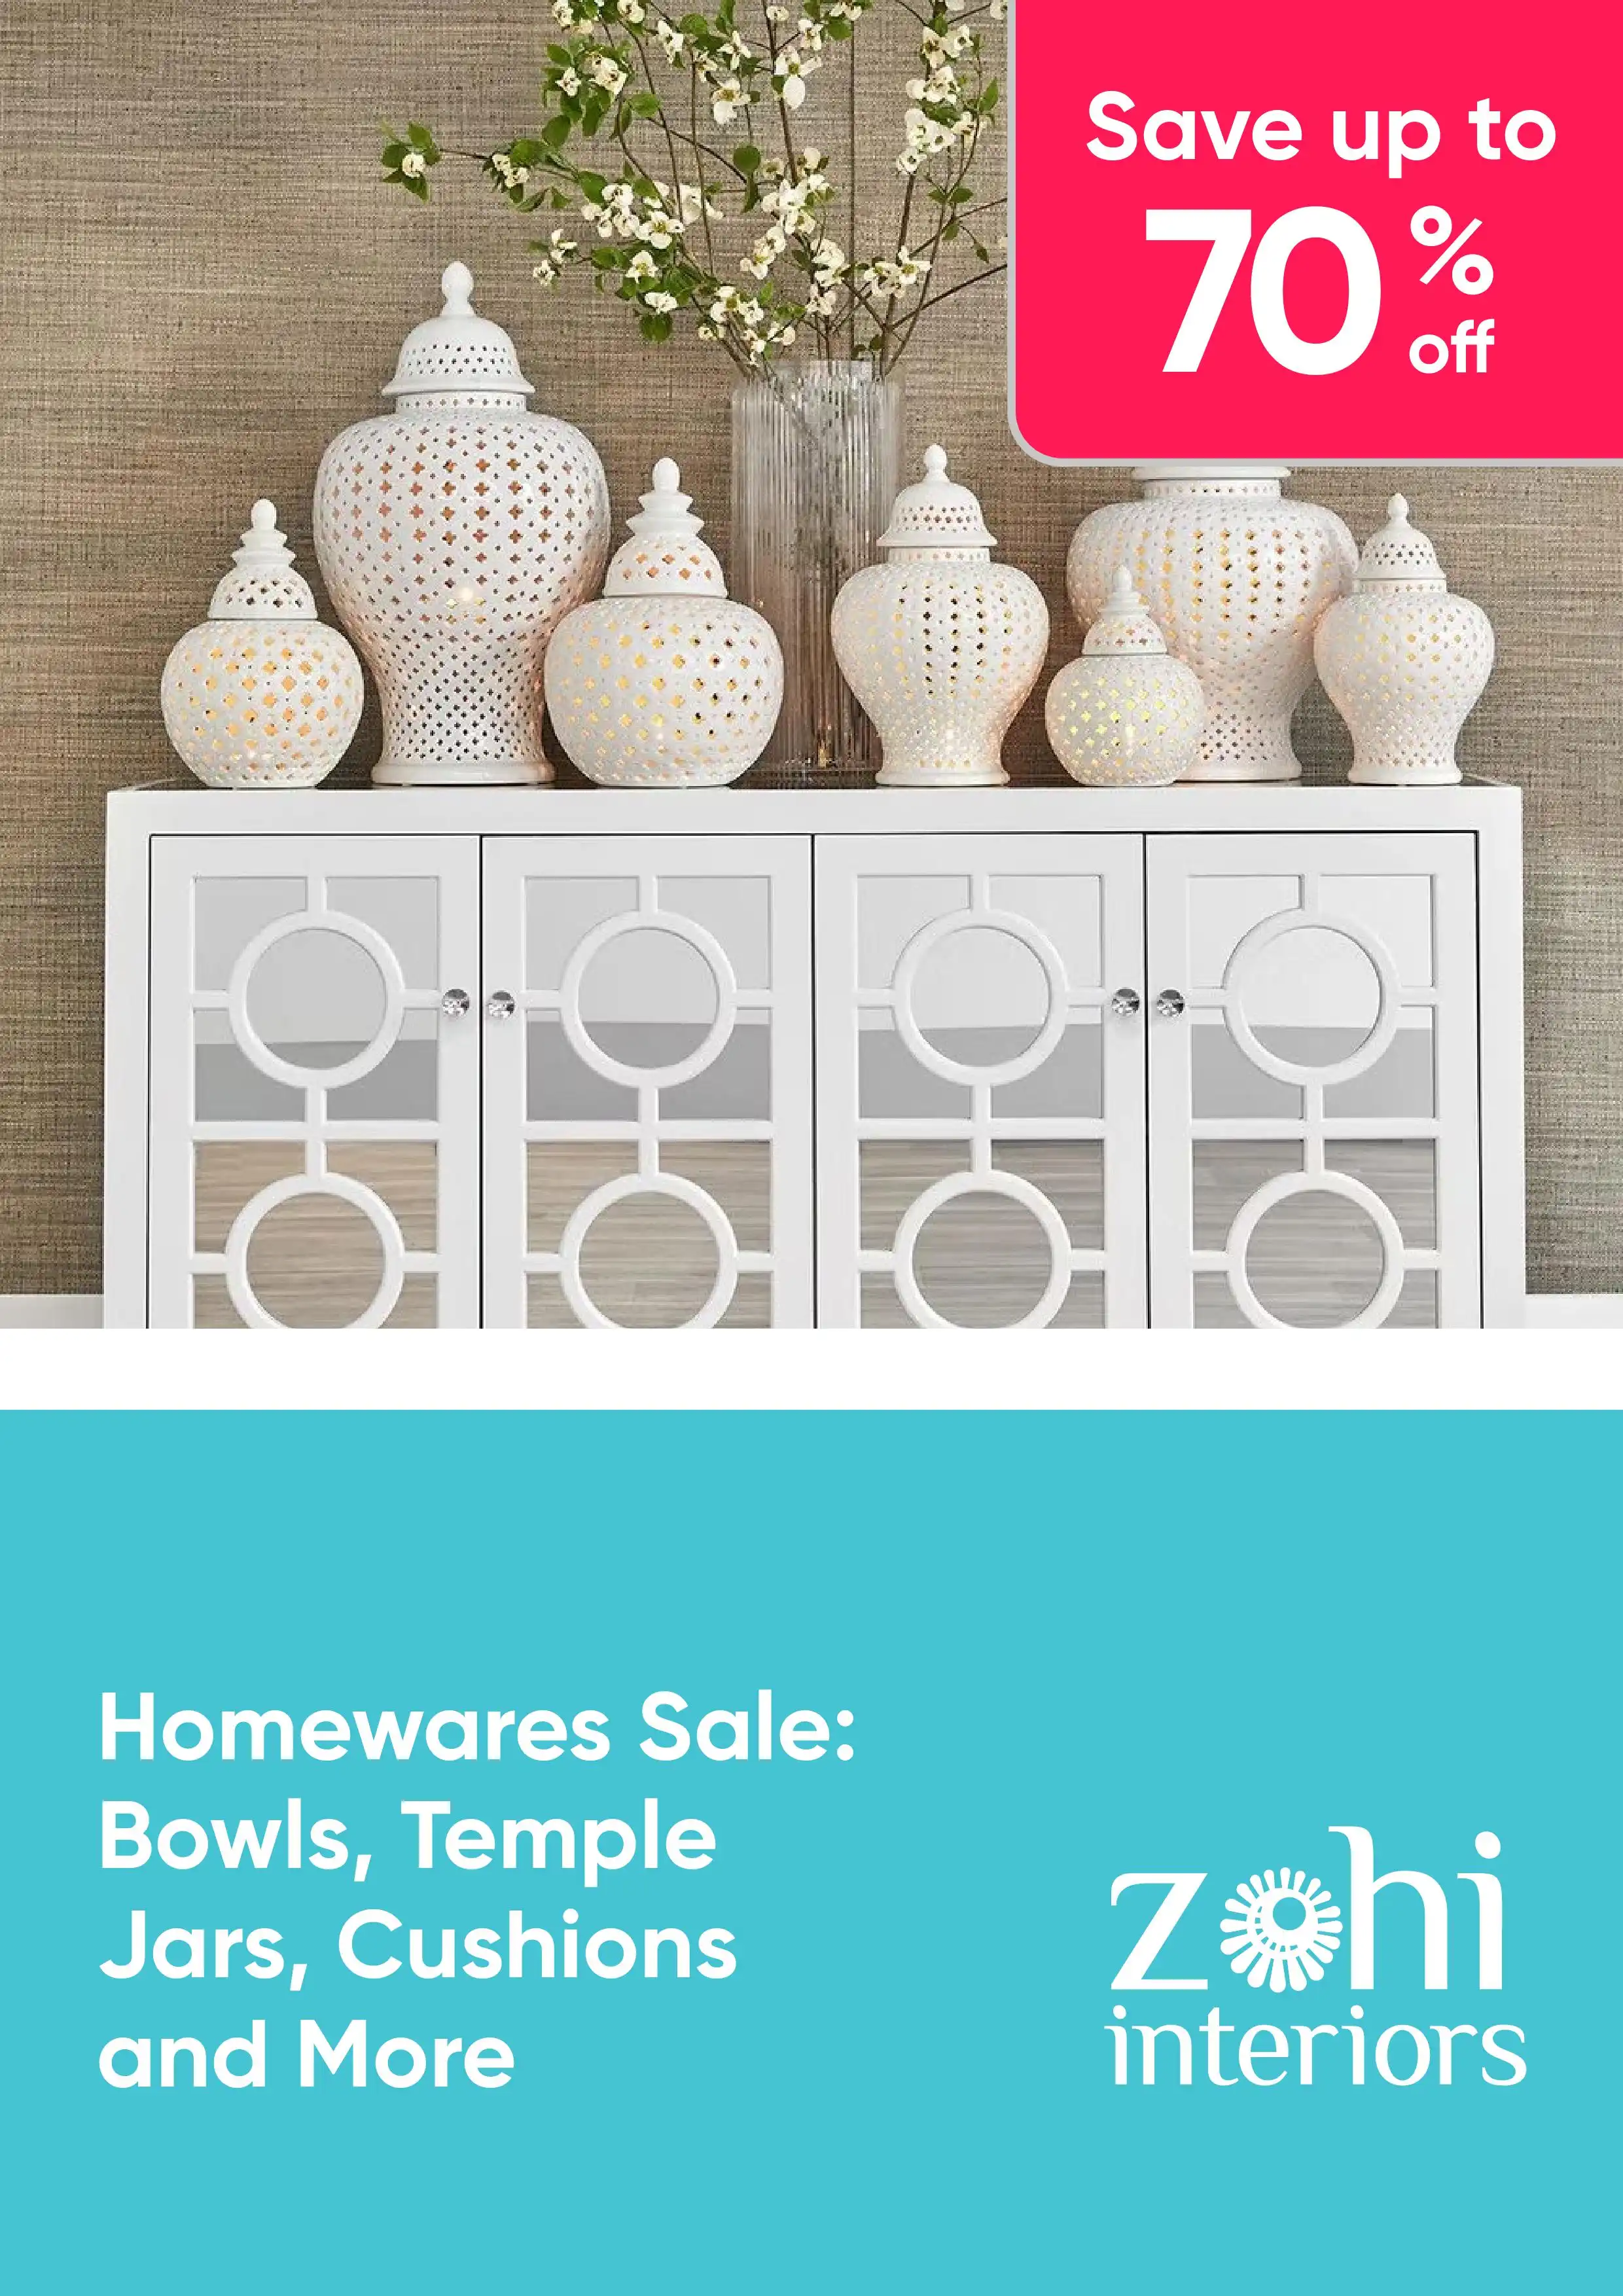 Homewares Sale: Bowls, Temple Jars, Cushions and More – up to 70% off